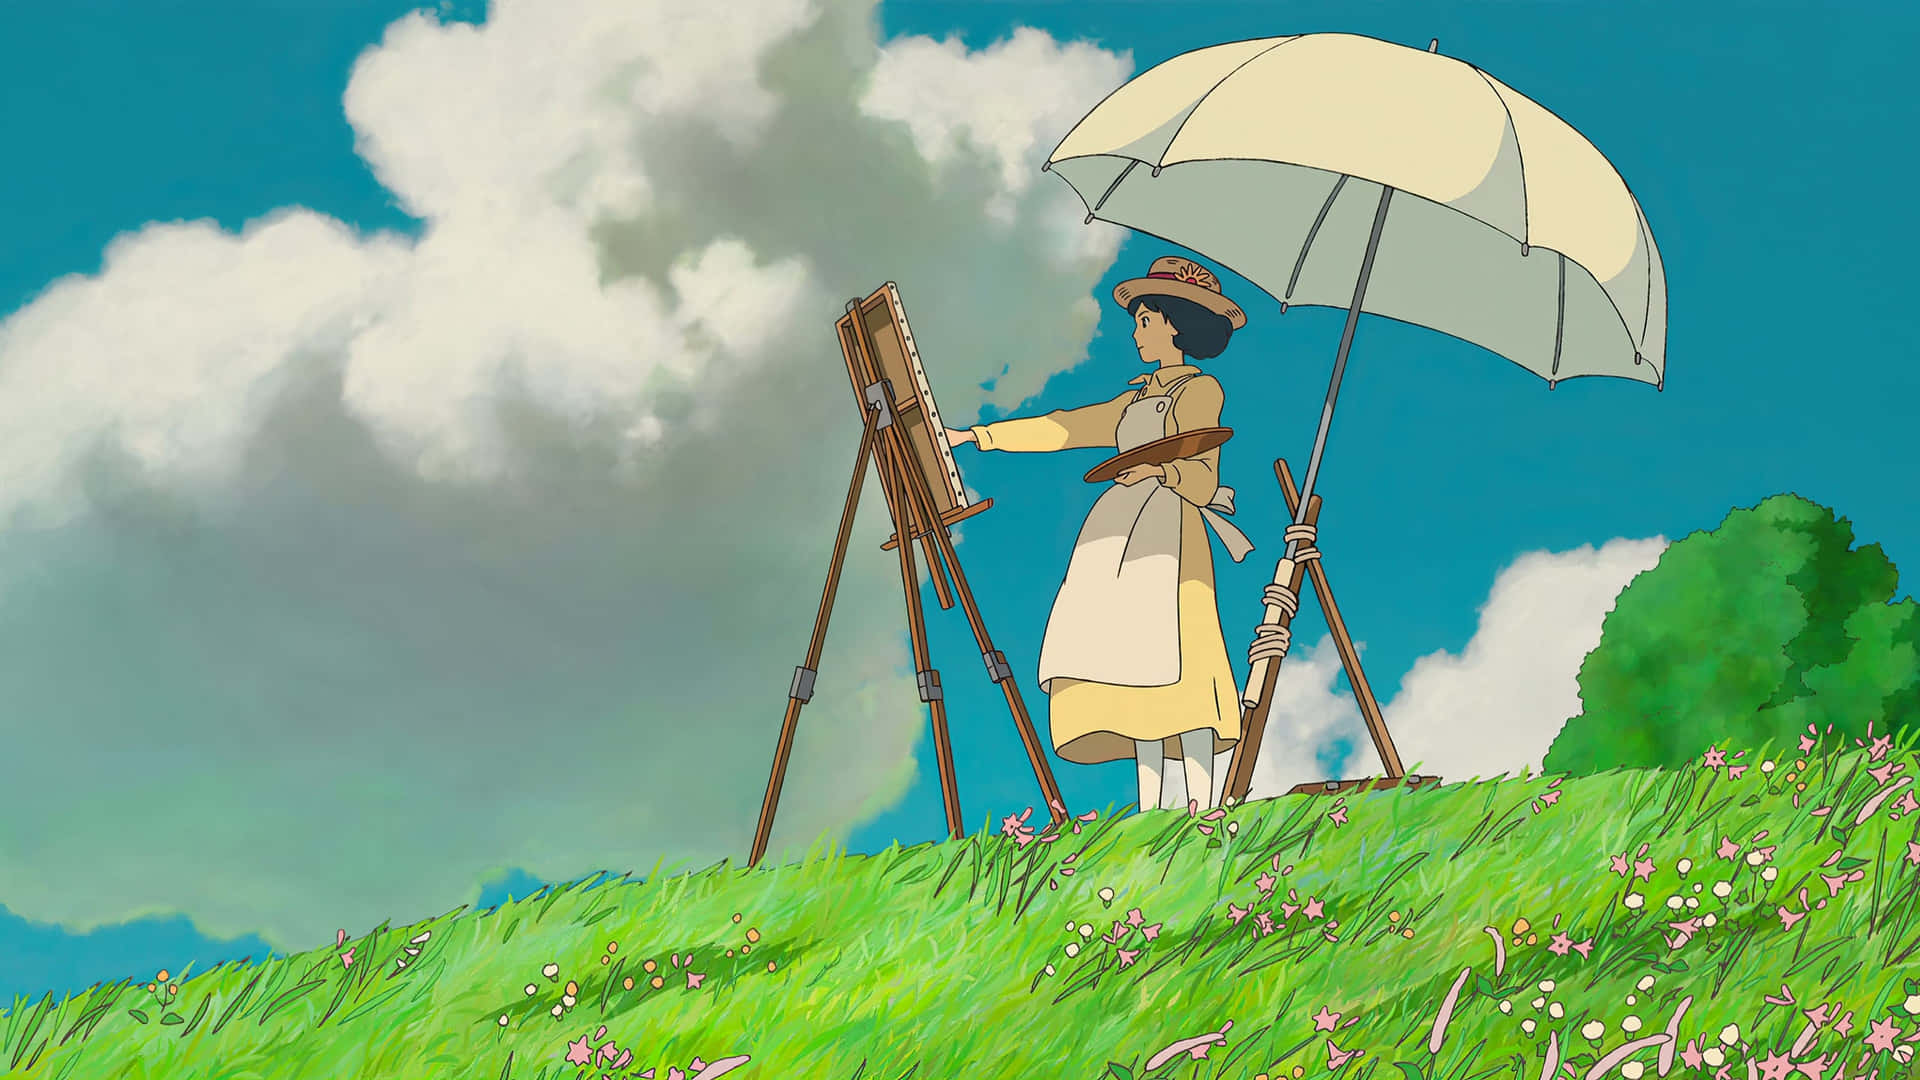 "The Wind Rises - Finding Courage and Strength in Your Dreams" Wallpaper